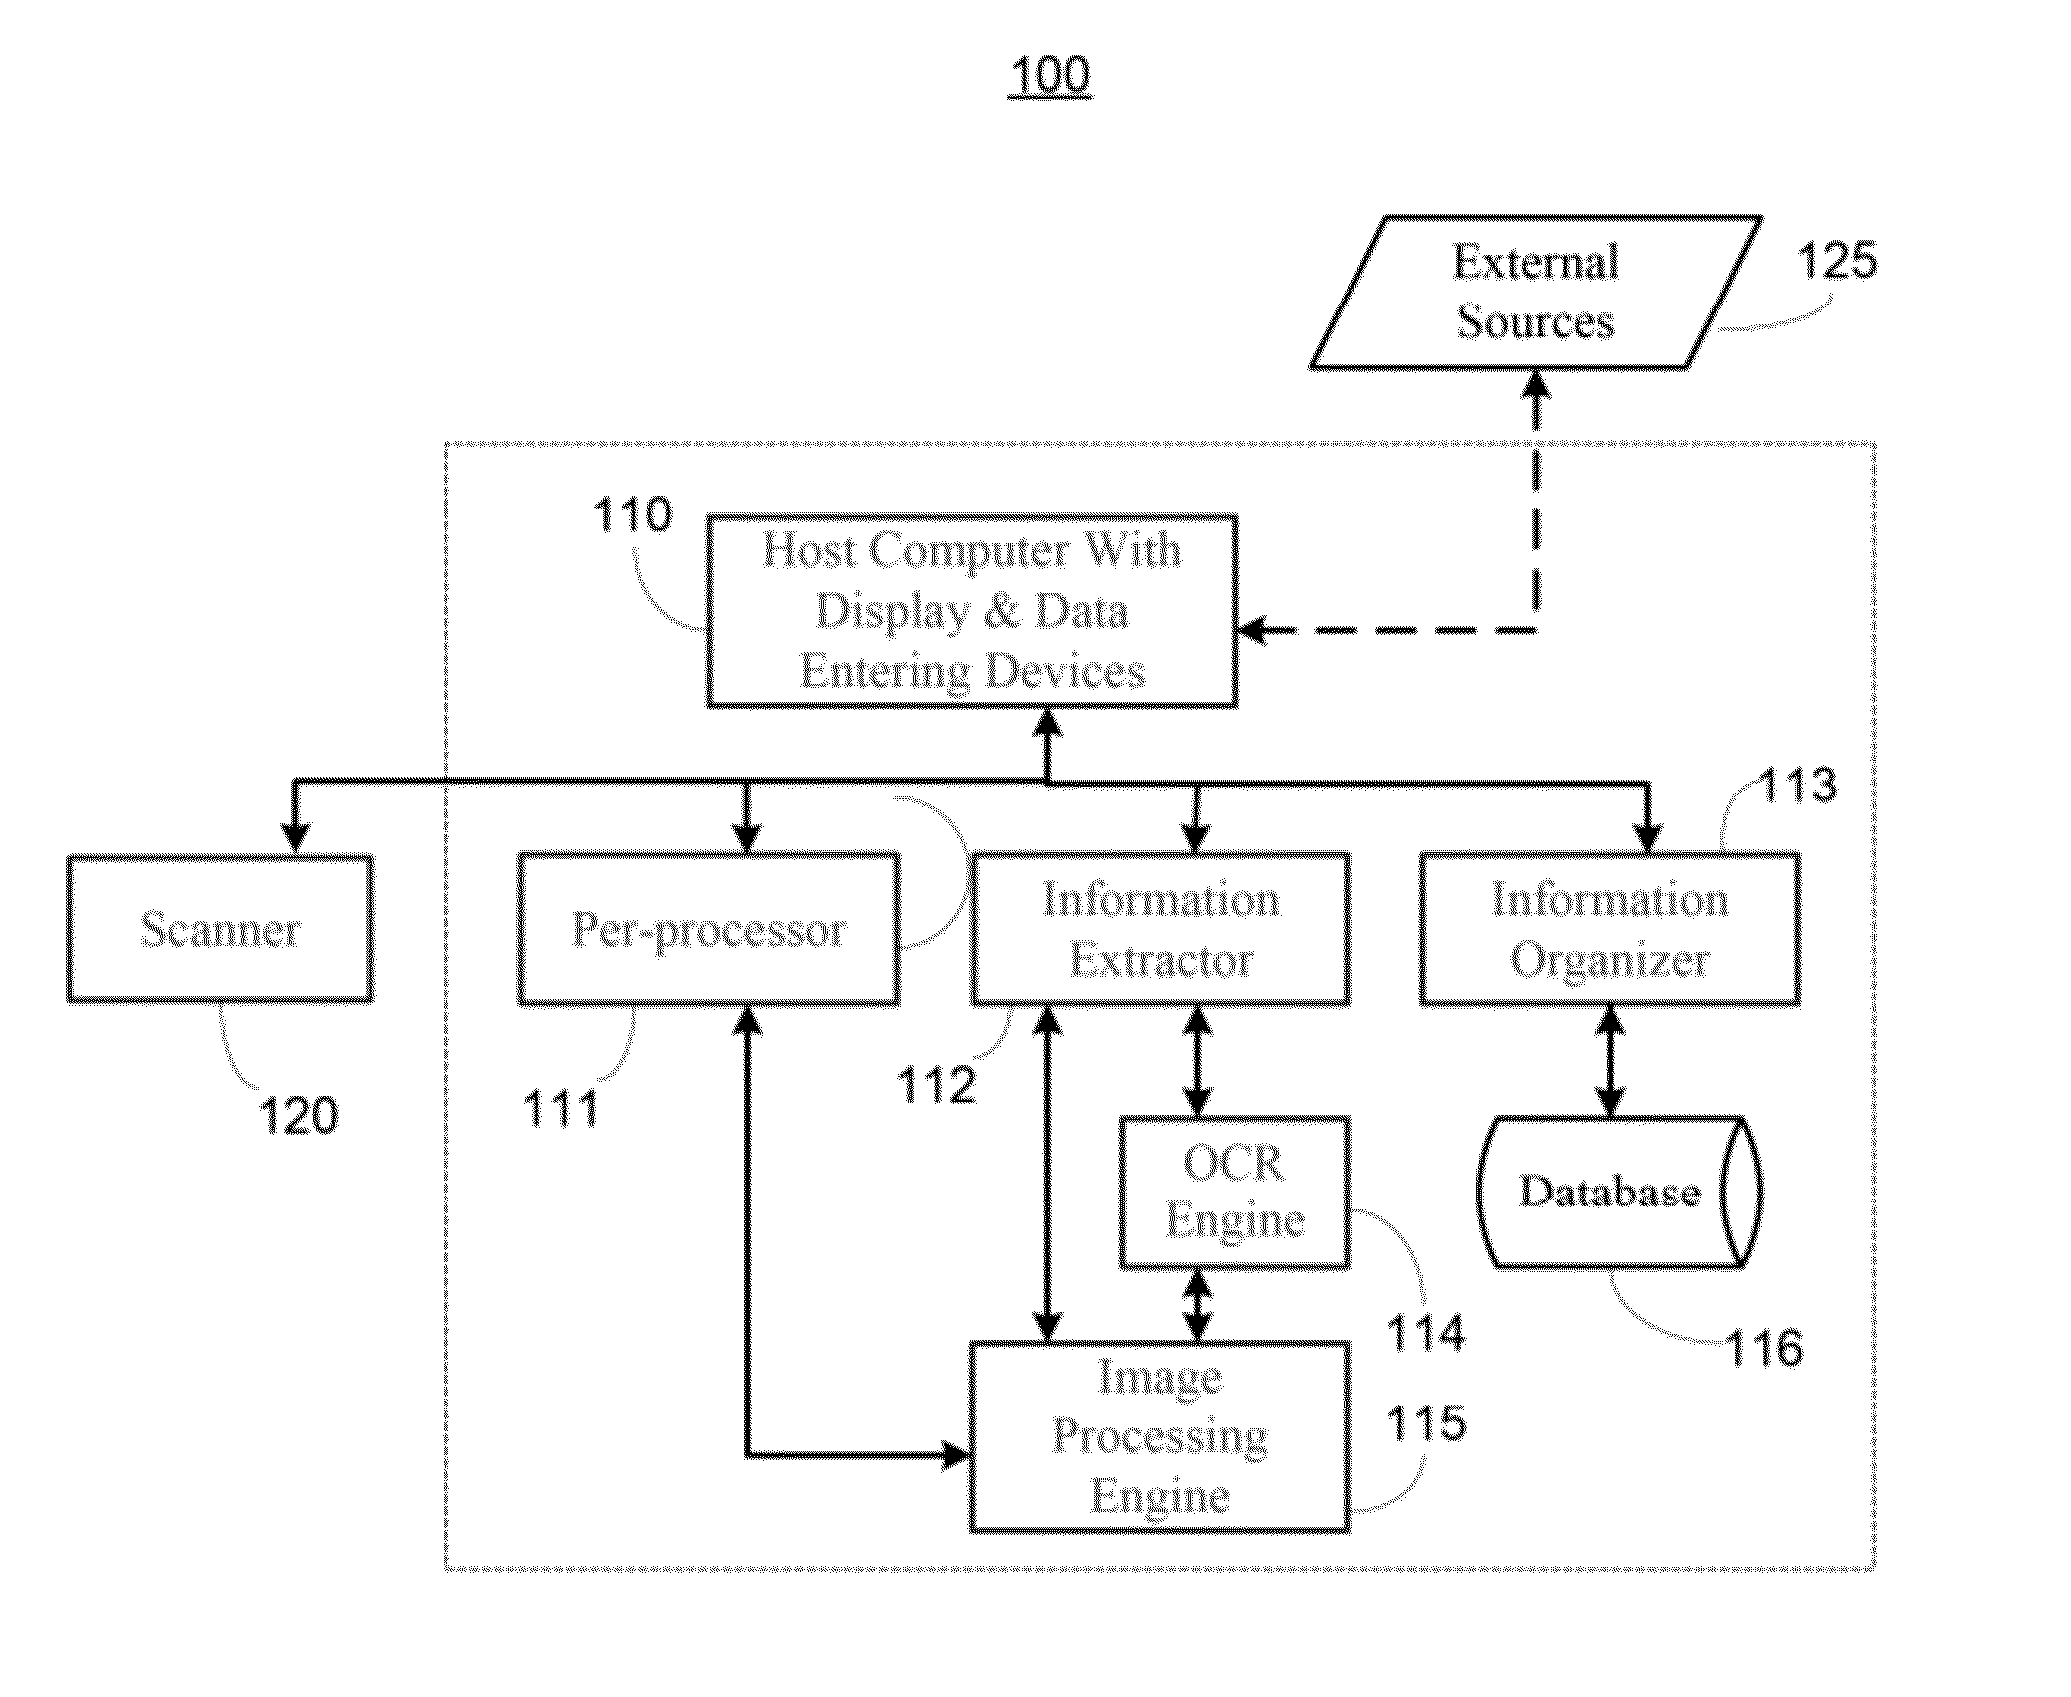 System and methods for reading and managing business card information